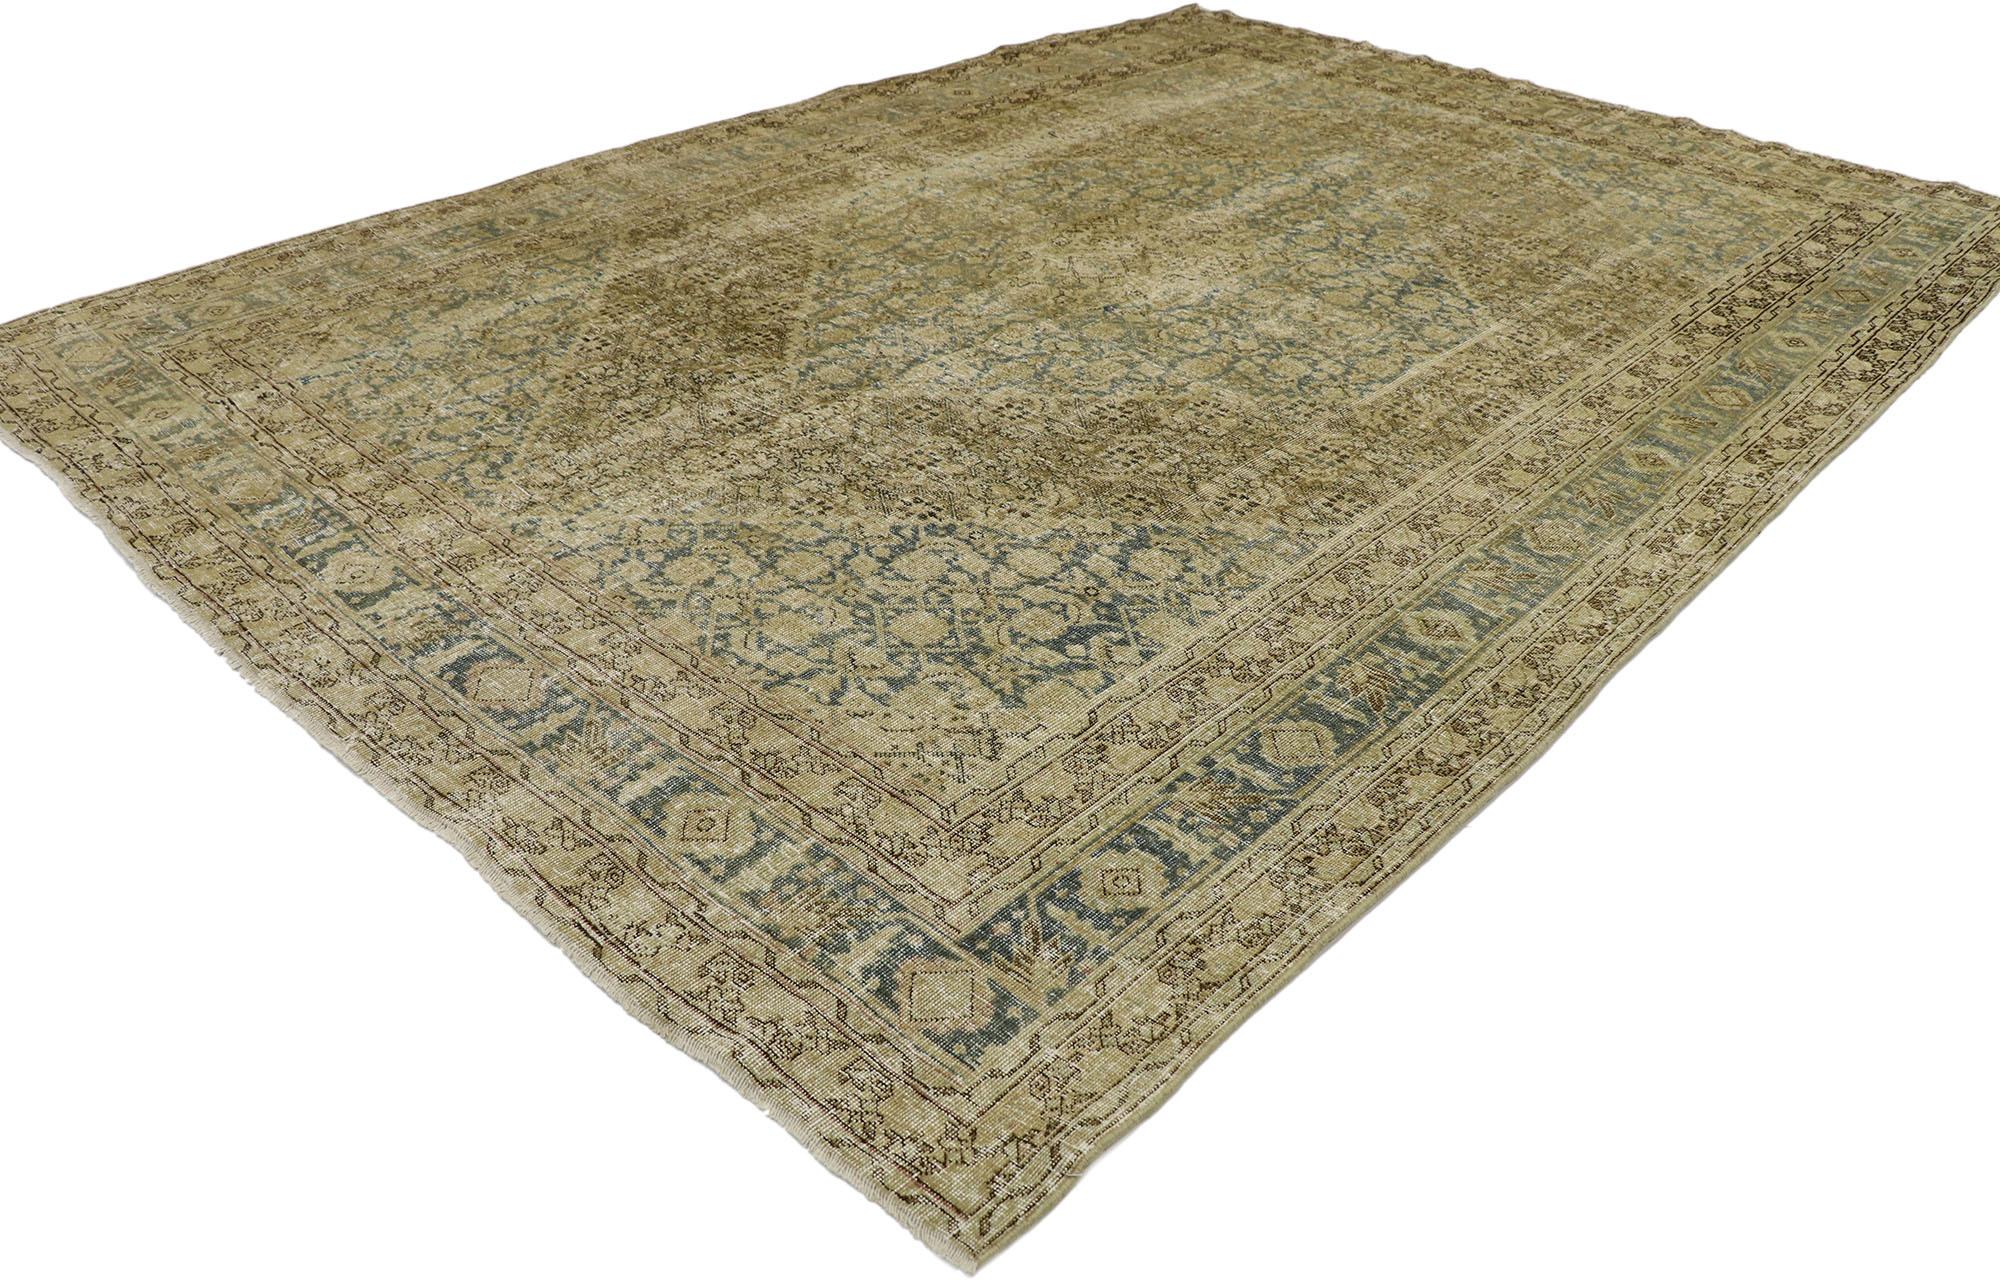 53222, distressed antique Persian Tabriz rug with modern industrial style. Warm and inviting with rustic sensibility, this hand knotted wool distressed antique Persian Tabriz rug beautifully embodies a Modern Industrial style. The lovingly time-worn